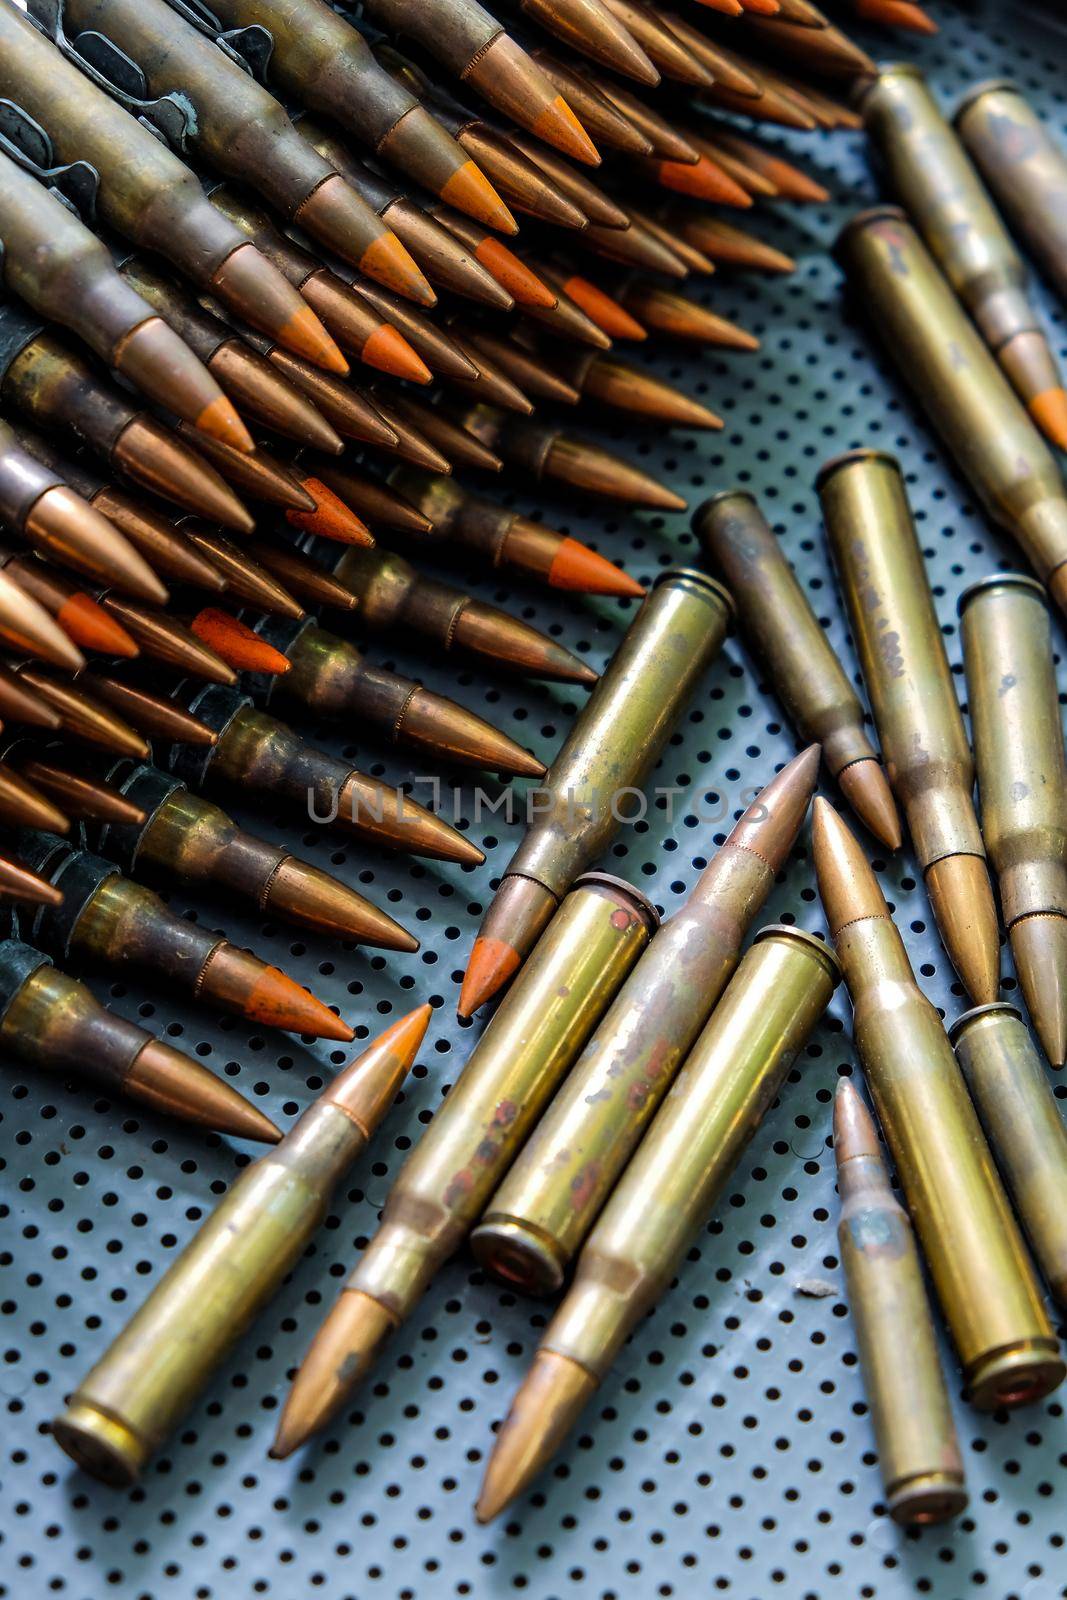 Close up Image of Rifle Bullets